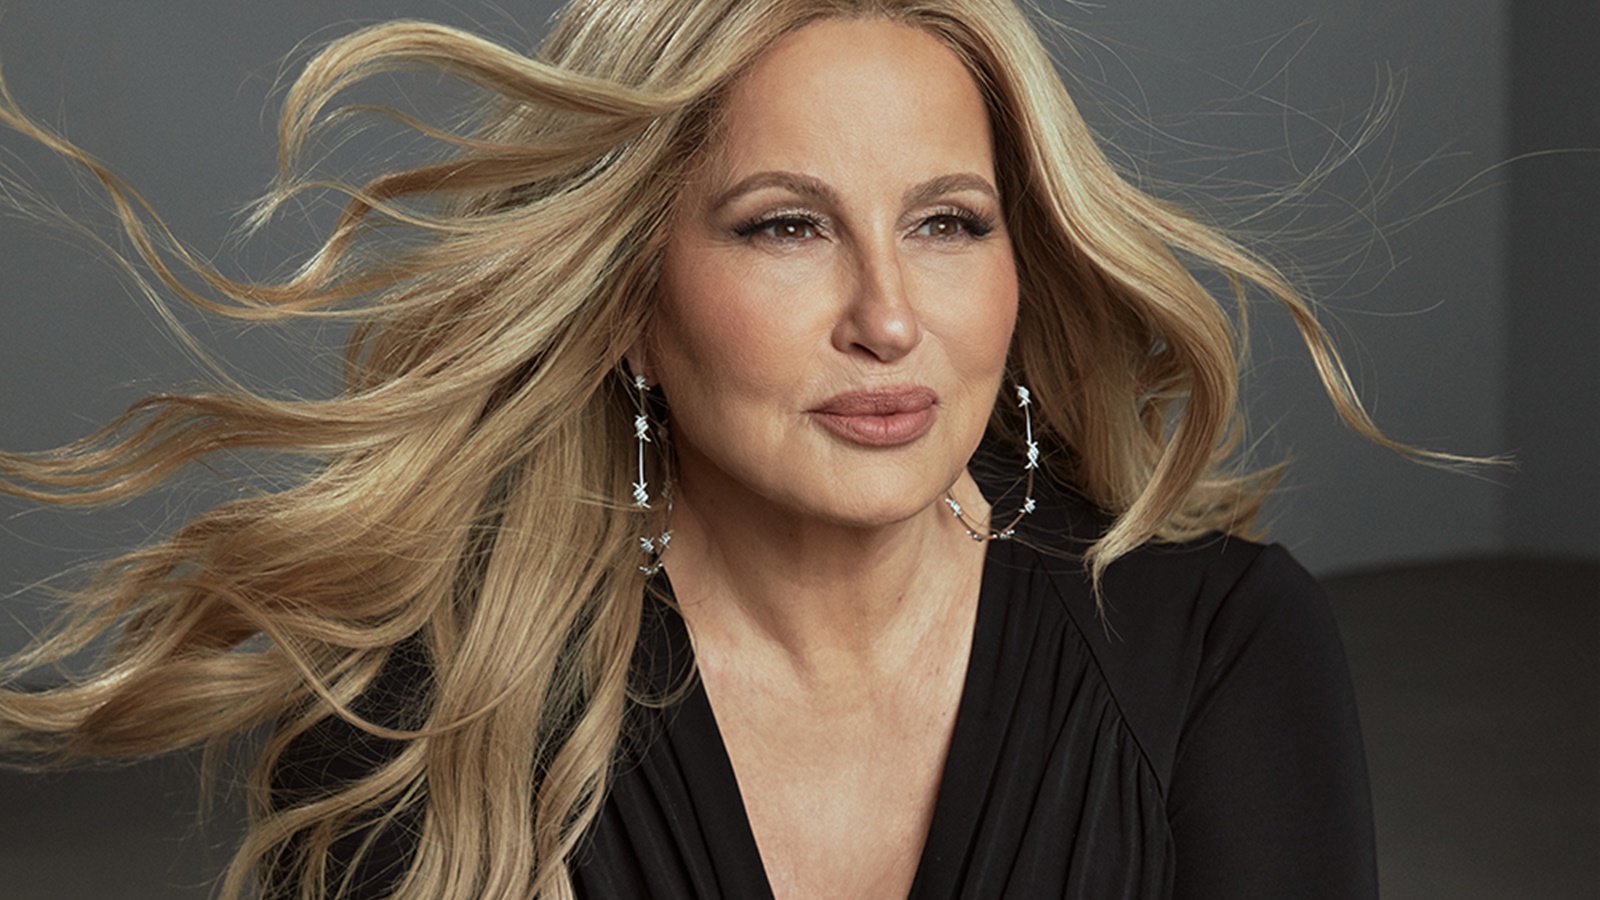 Jennifer Coolidge Feels Insecure, Admits: 'I Have Regrets About How I've Handled My Career'